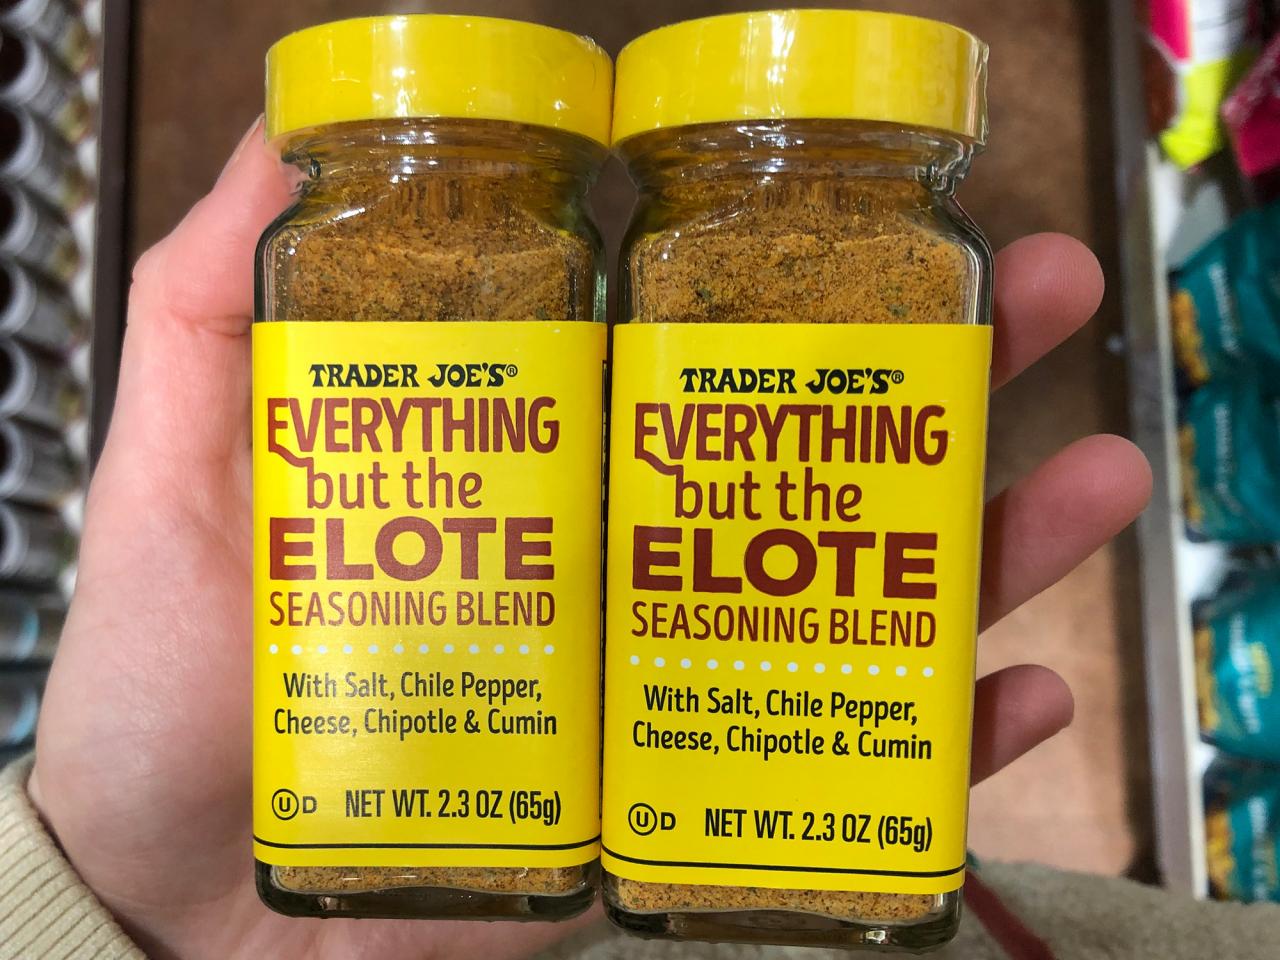 https://food.fnr.sndimg.com/content/dam/images/food/fullset/2020/02/19/FN_trader-joes-everything-but-the-elote_s4x3.jpg.rend.hgtvcom.1280.960.suffix/1582142877207.jpeg